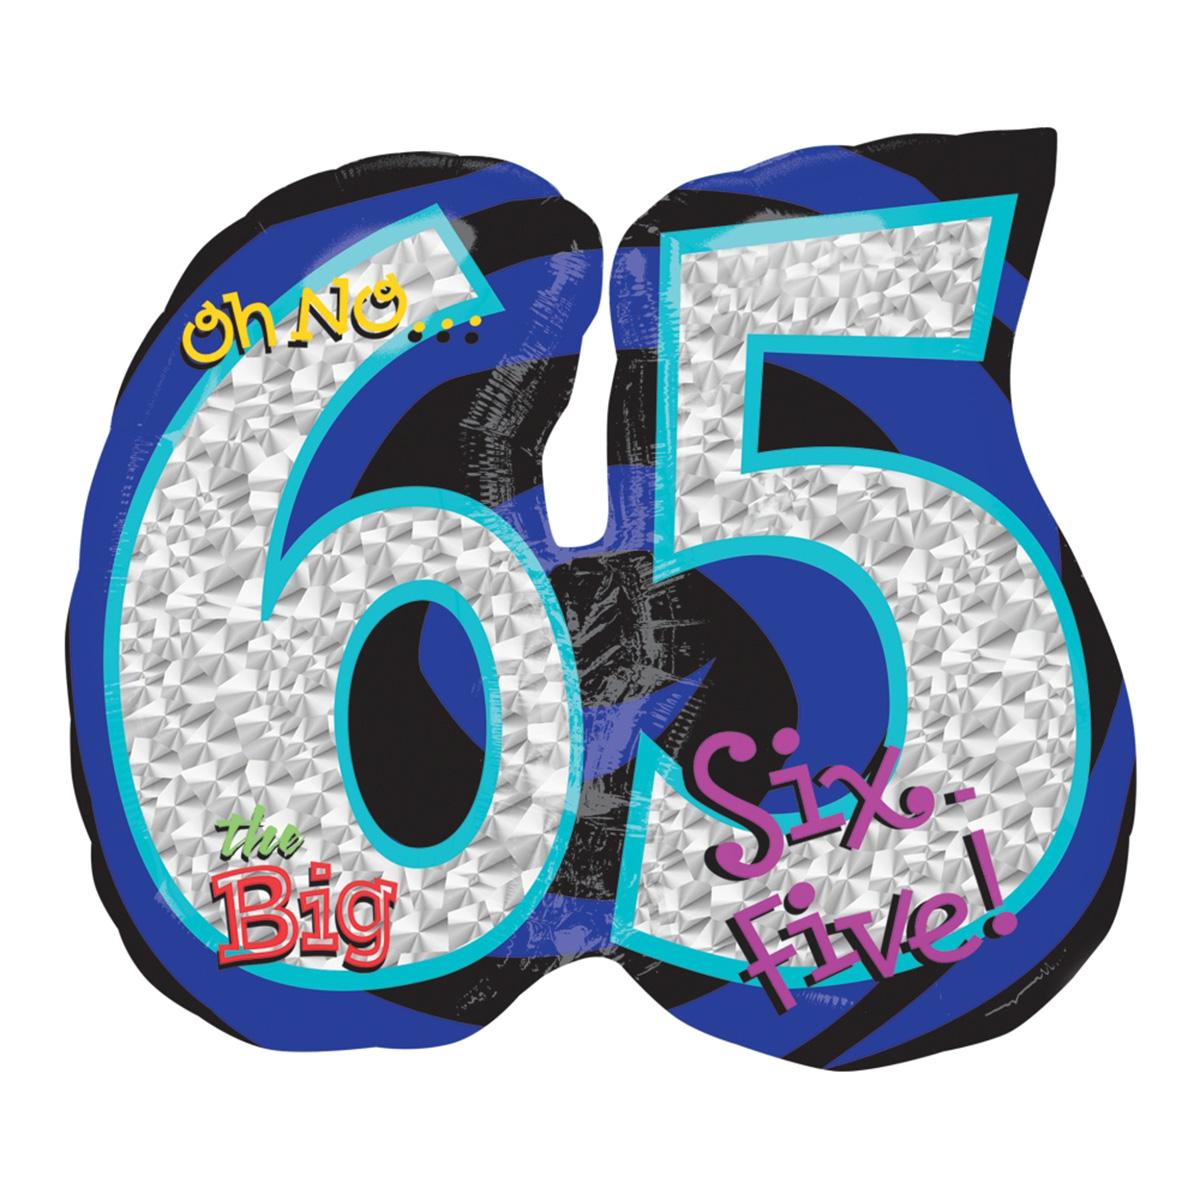 Oh No! It's My Birthday 65 SuperShape Balloon 27 x 23in Balloons & Streamers - Party Centre